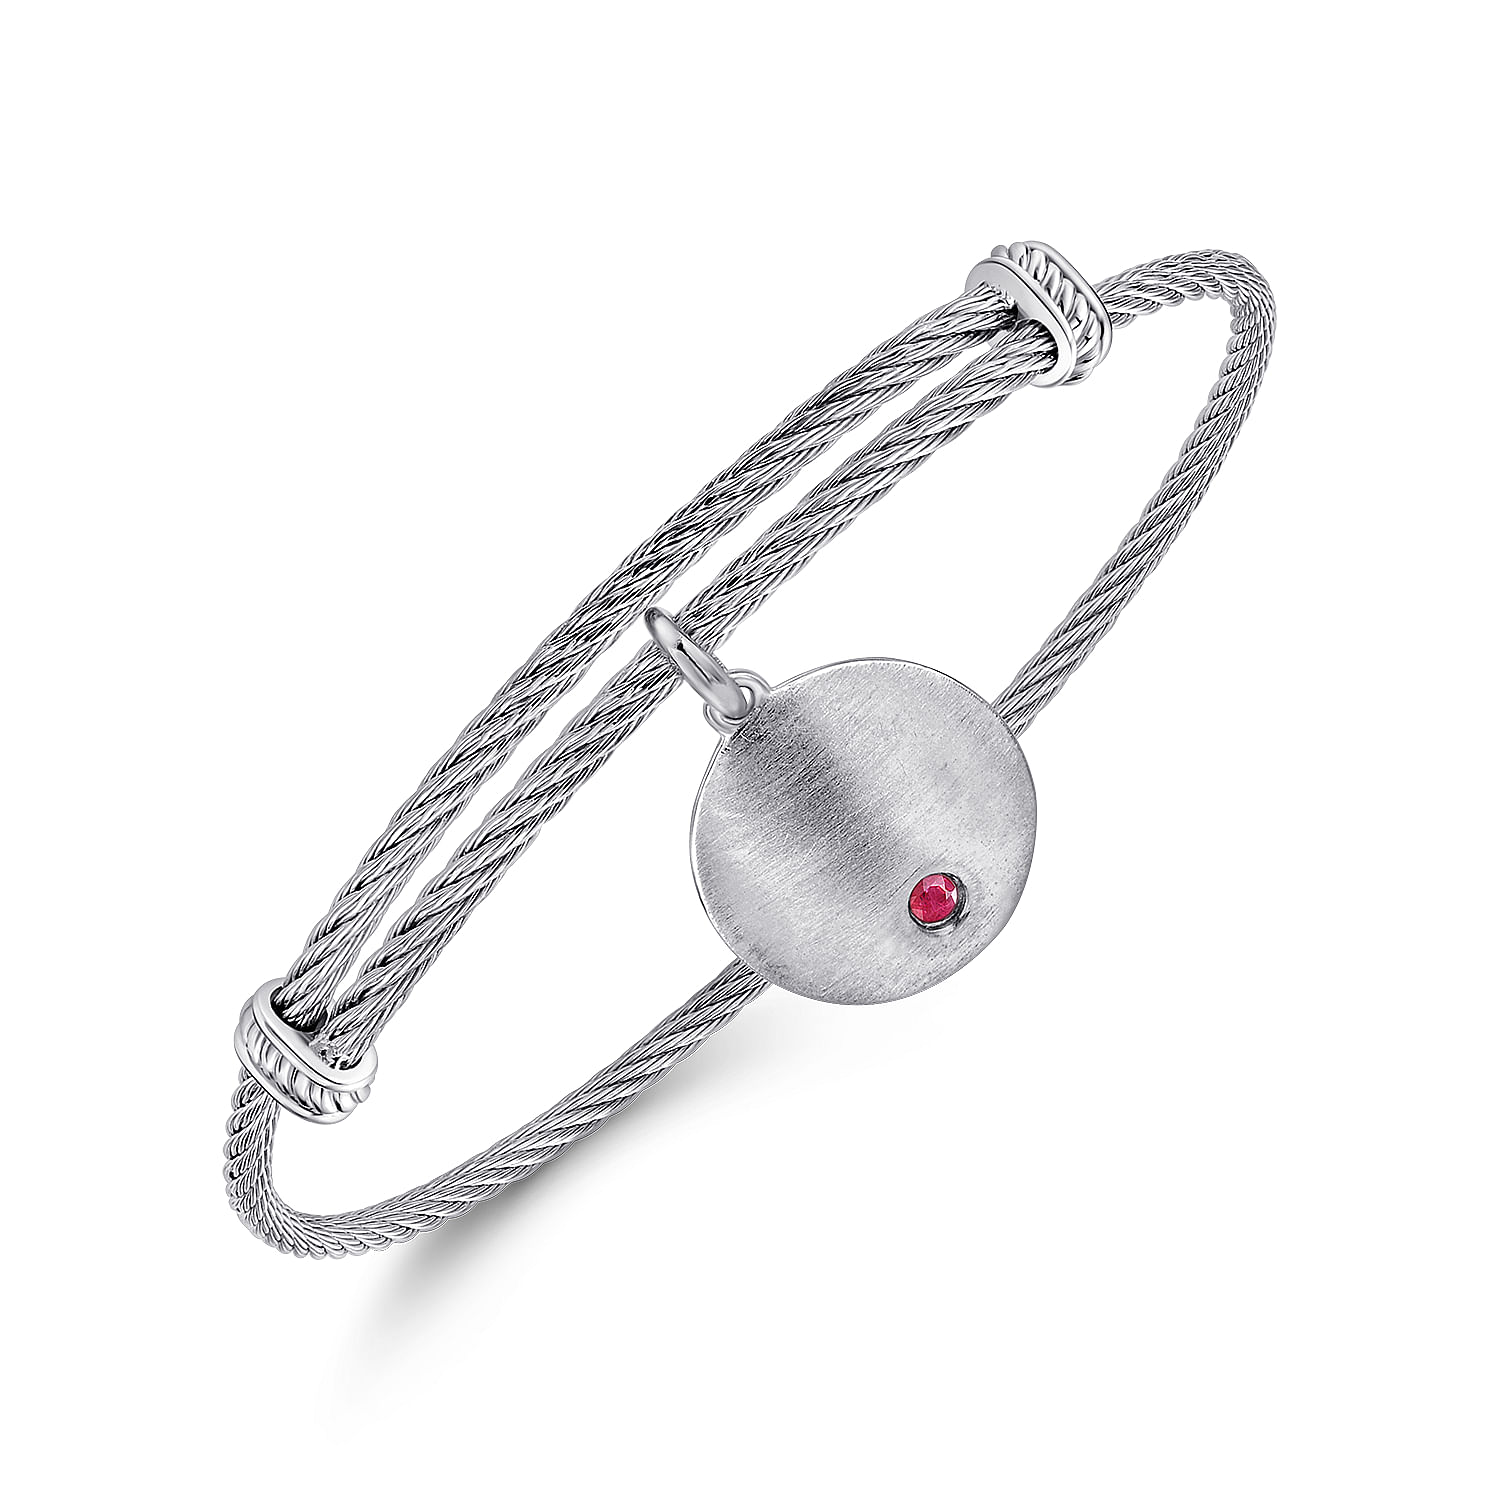 Adjustable Stainless Steel Bangle with Round Sterling Silver Ruby Stone Disc Charm